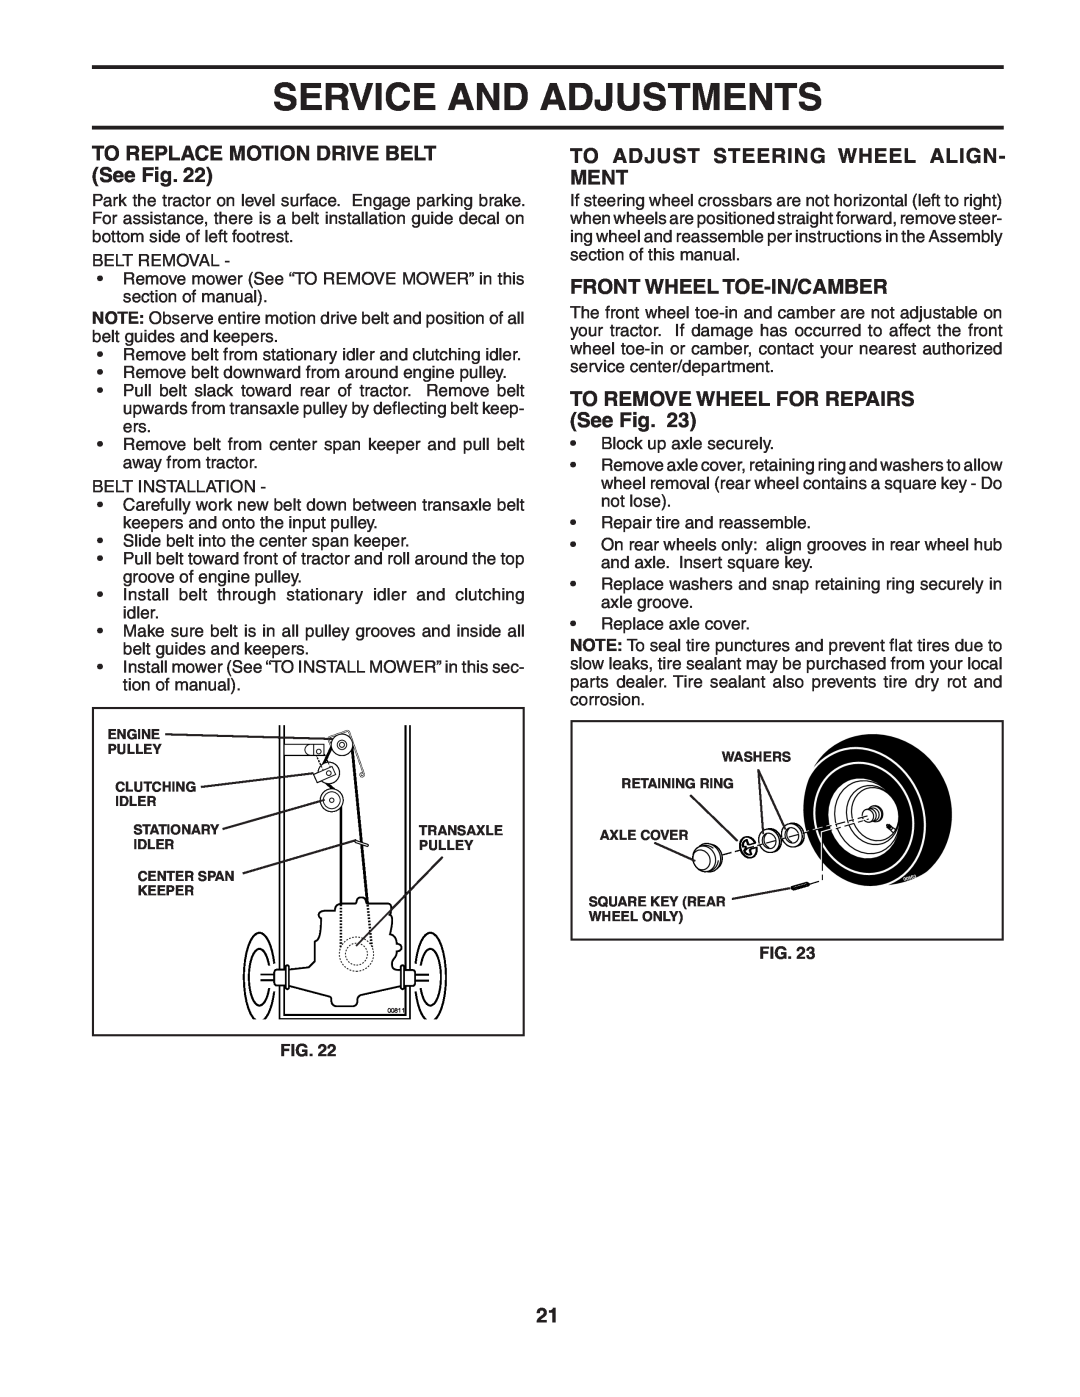 McCulloch MC1136B TO REPLACE MOTION DRIVE BELT See Fig, To Adjust Steering Wheel Align- Ment, Front Wheel Toe-In/Camber 